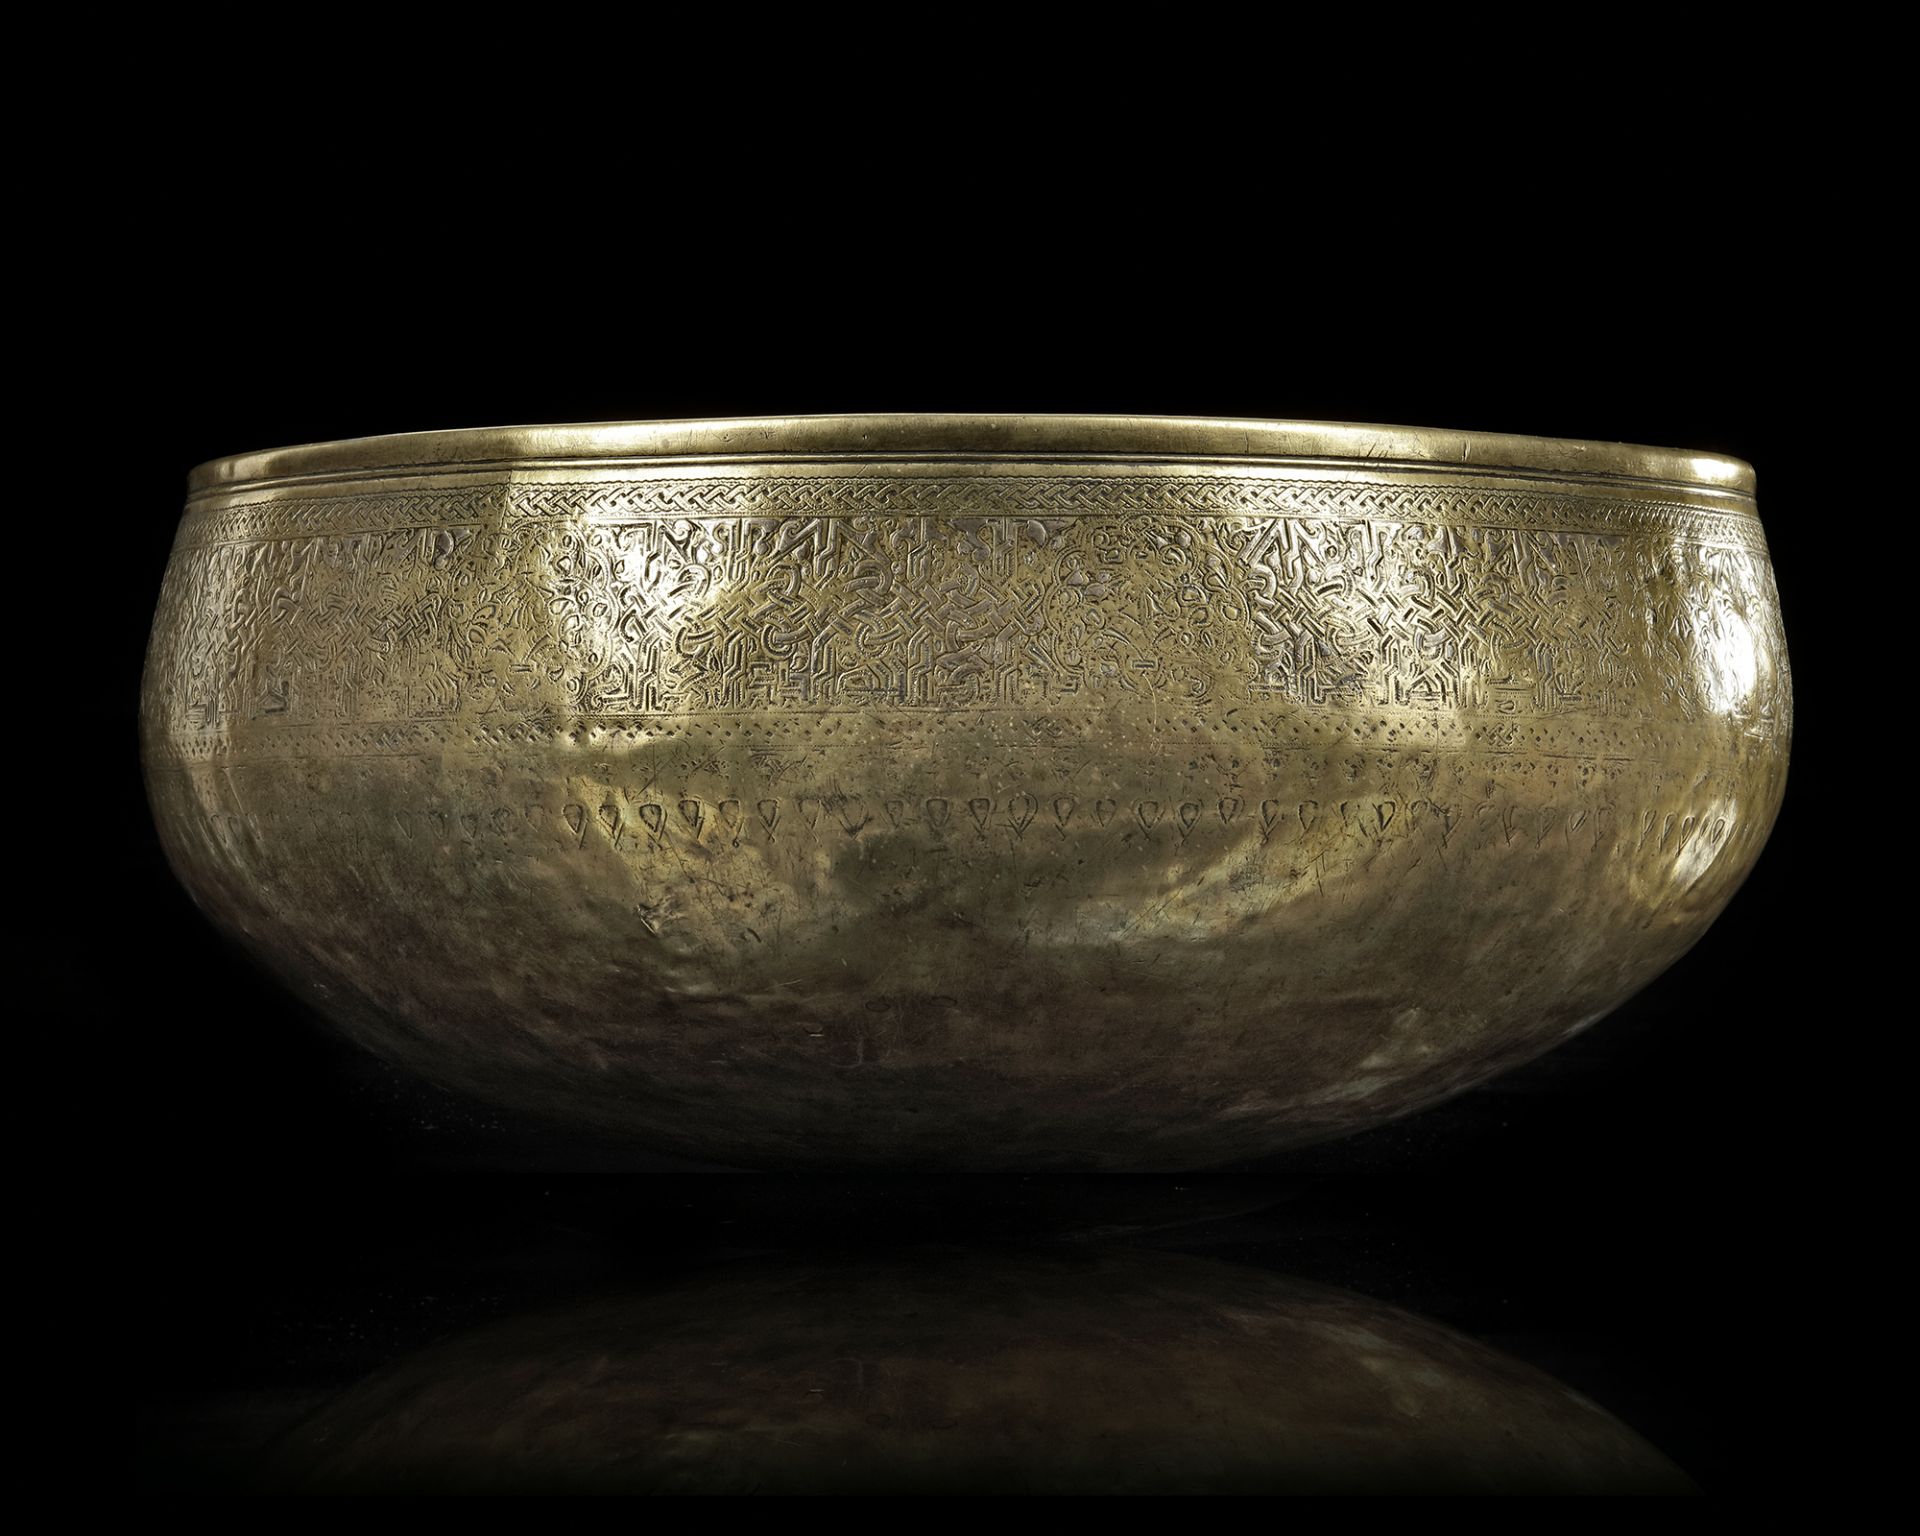 A SILVER INLAID BRASS BOWL, 14TH CENTURY - Image 5 of 10